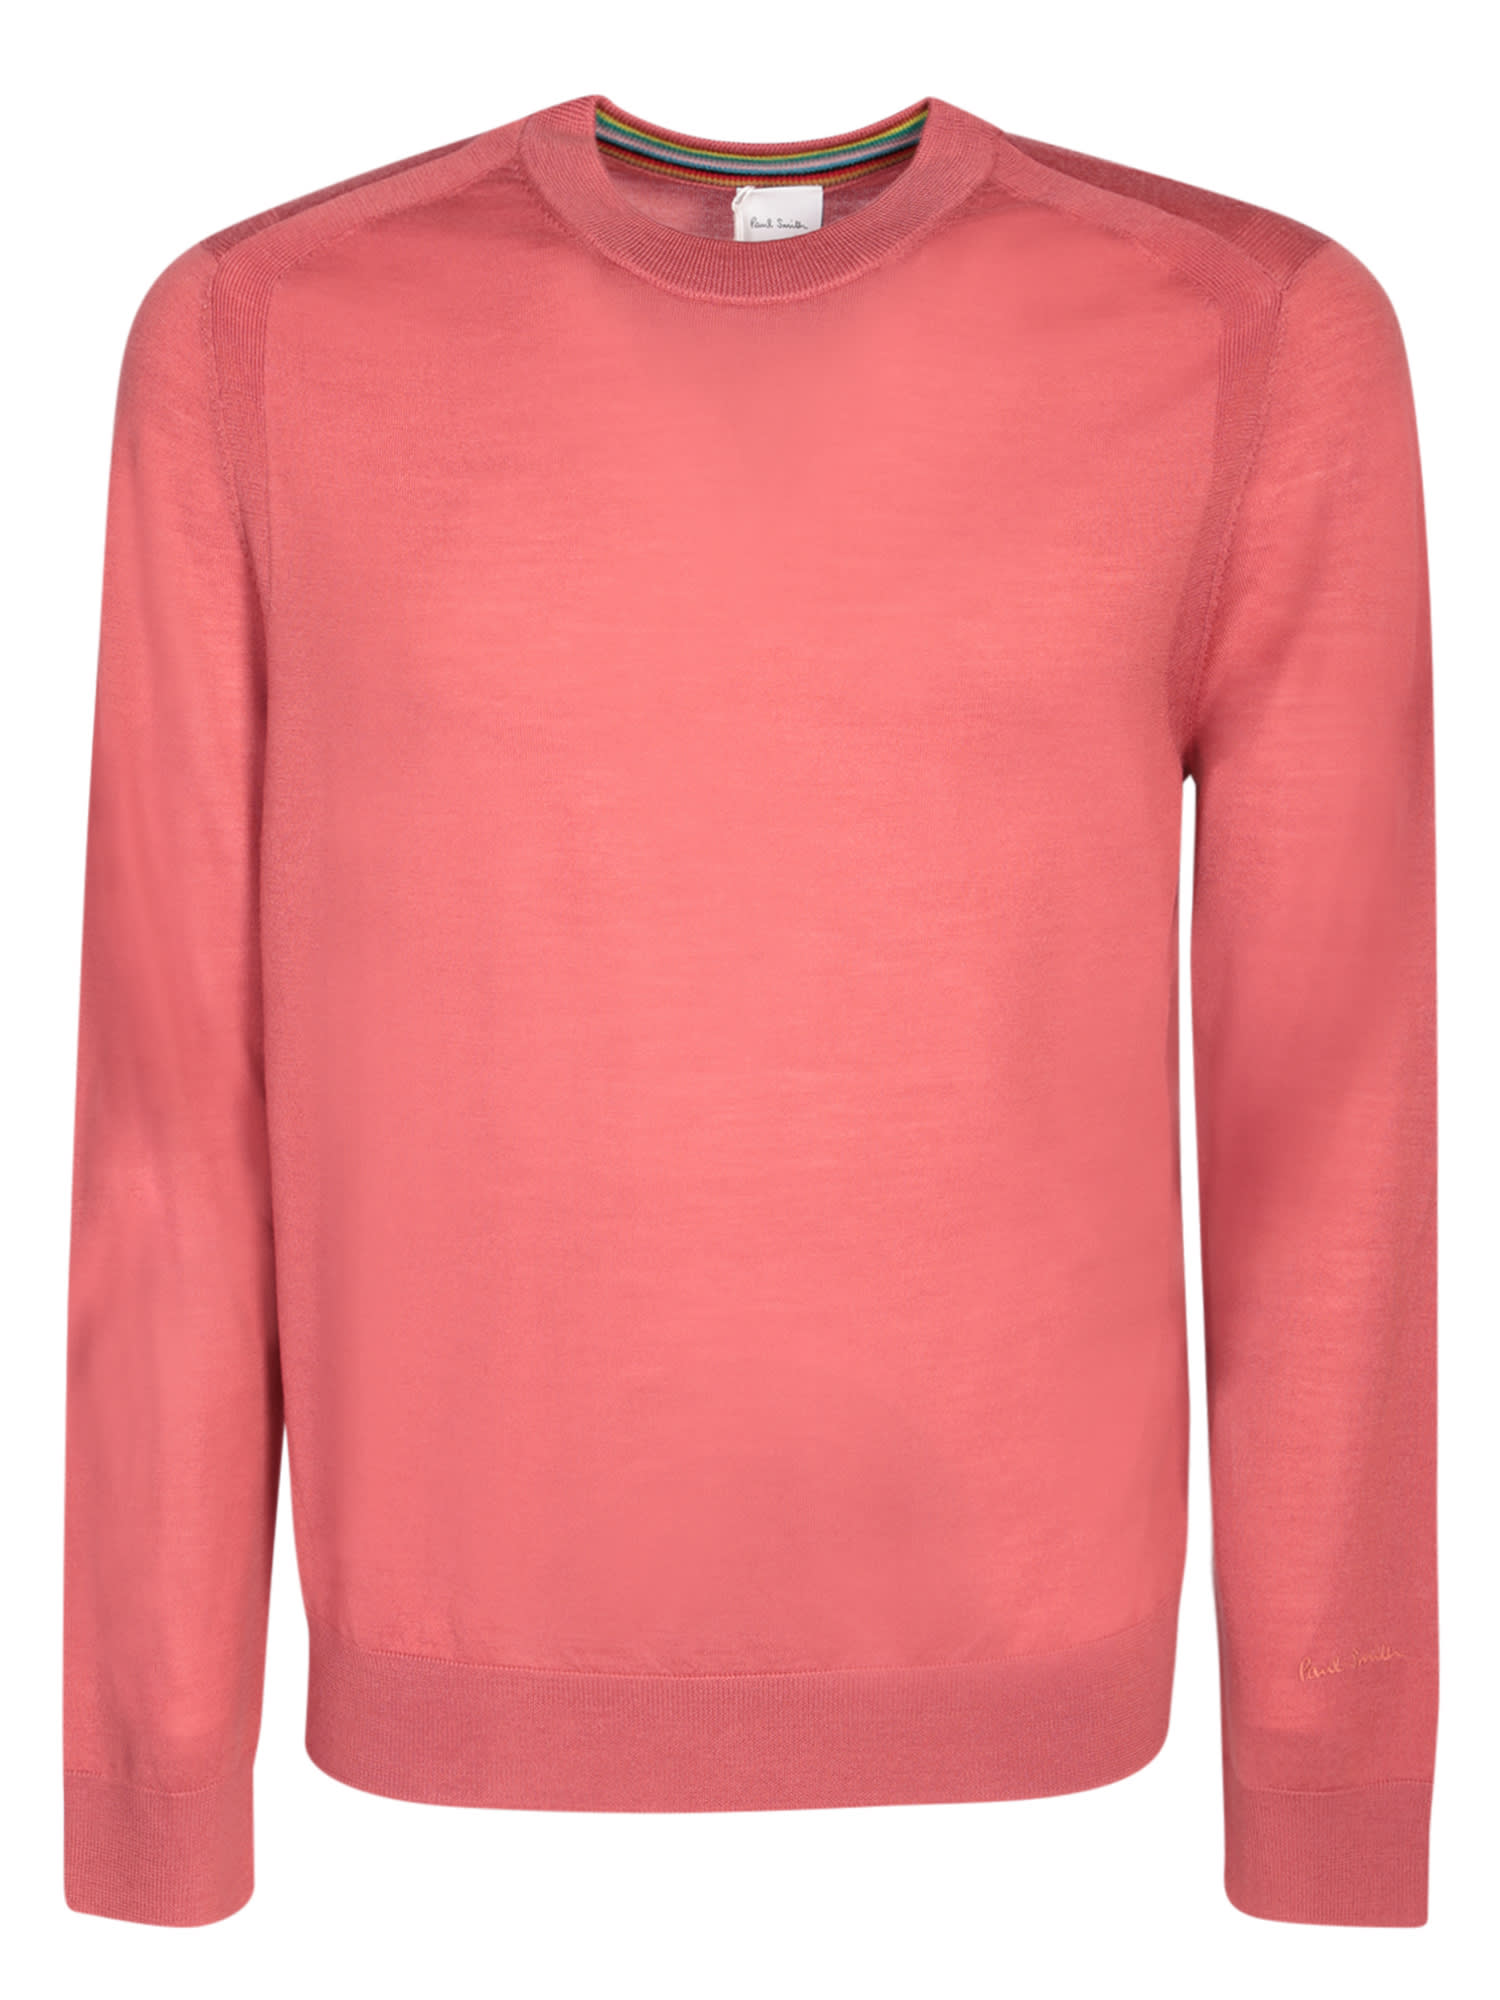 PAUL SMITH MERINO WOOL RED PULLOVER